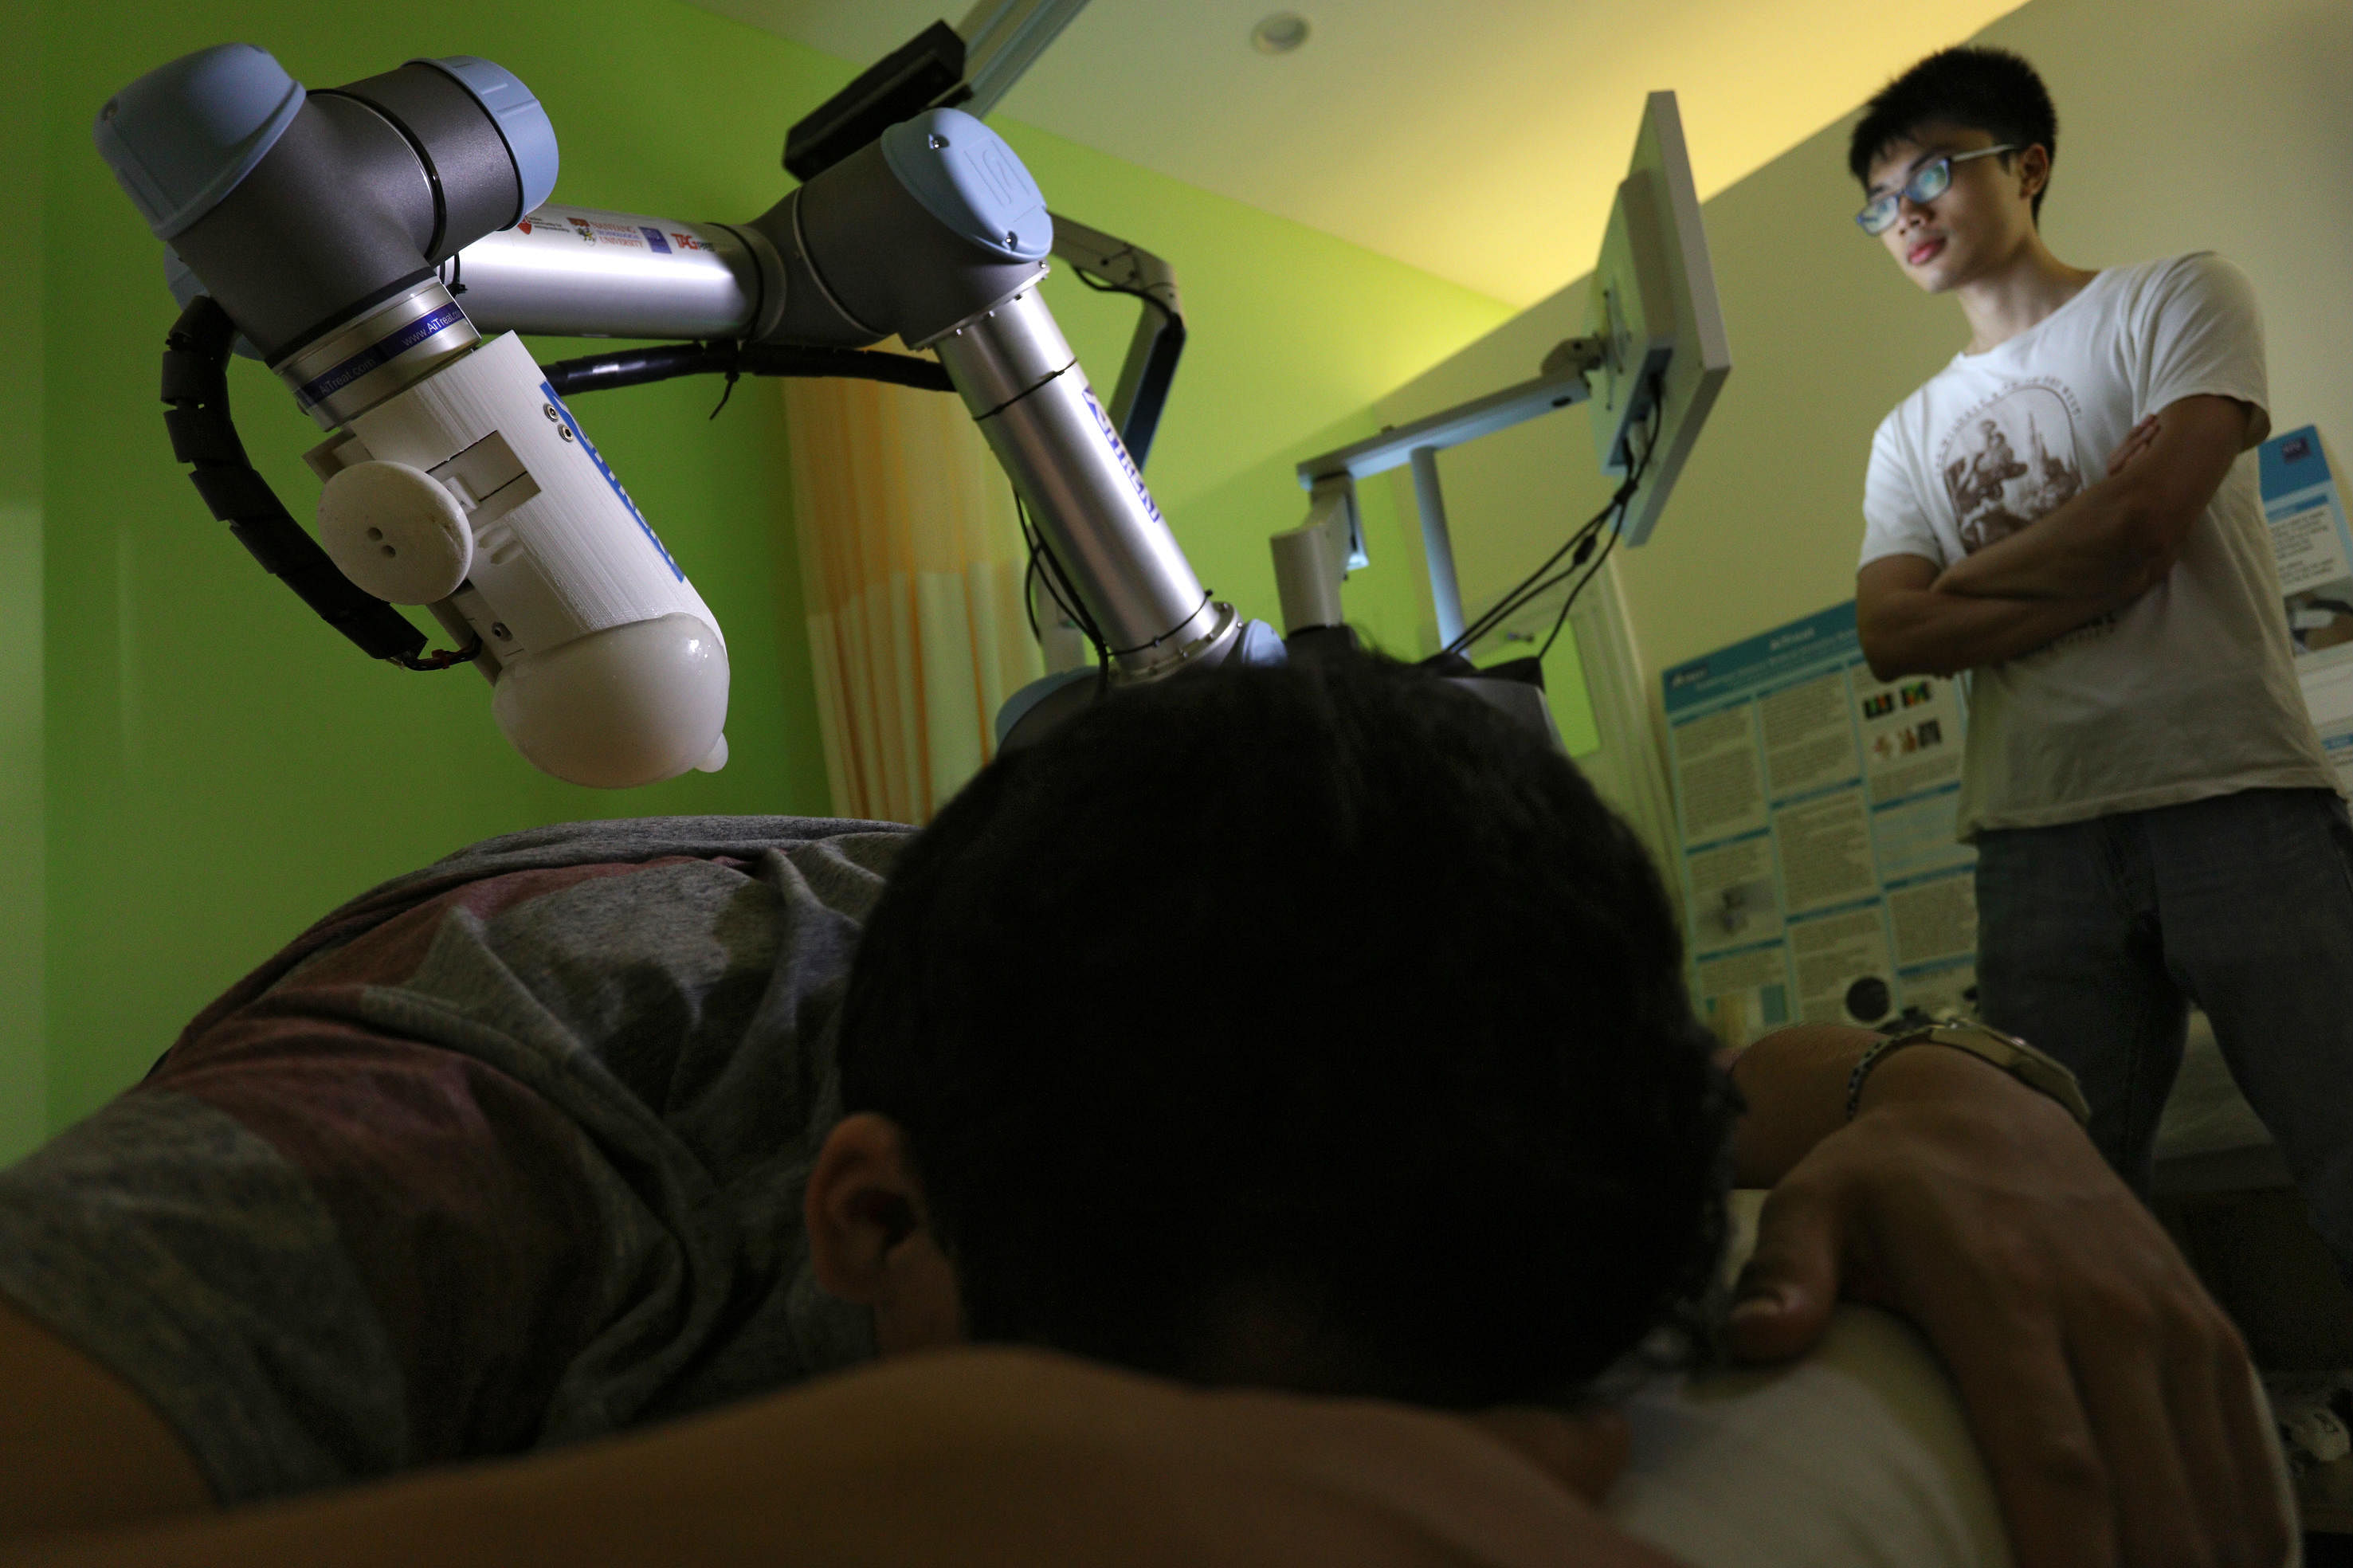 Emma, a robotic traditional Chinese medicine (TCM) massage therapist, demonstrating a massage at Kin Teck Tong's Sports Science and Chinese Medicine Clinic at the Kallang Wave Mall on July 18.